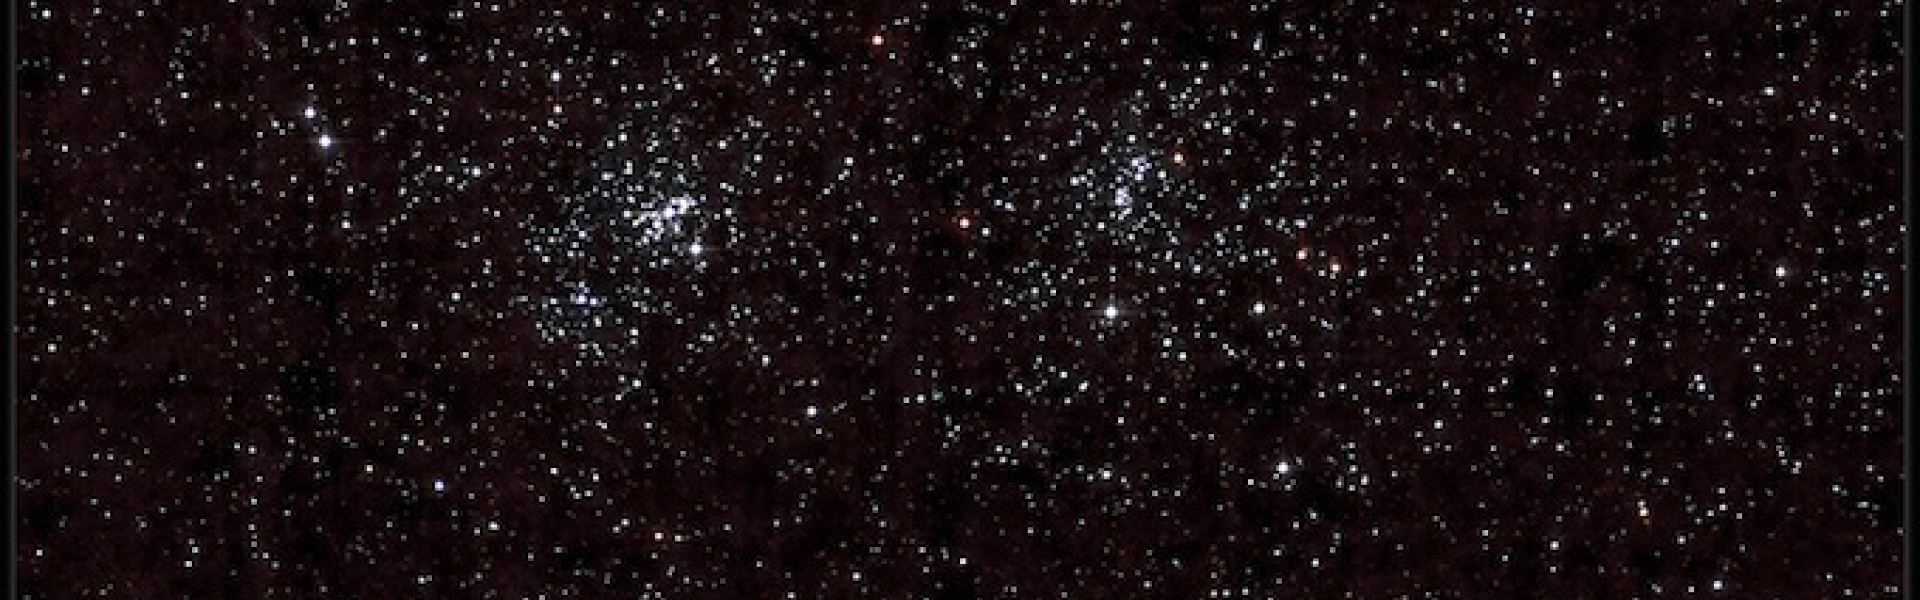 Double Cluster - NGC 884 and NGC 869 by Bill Longo